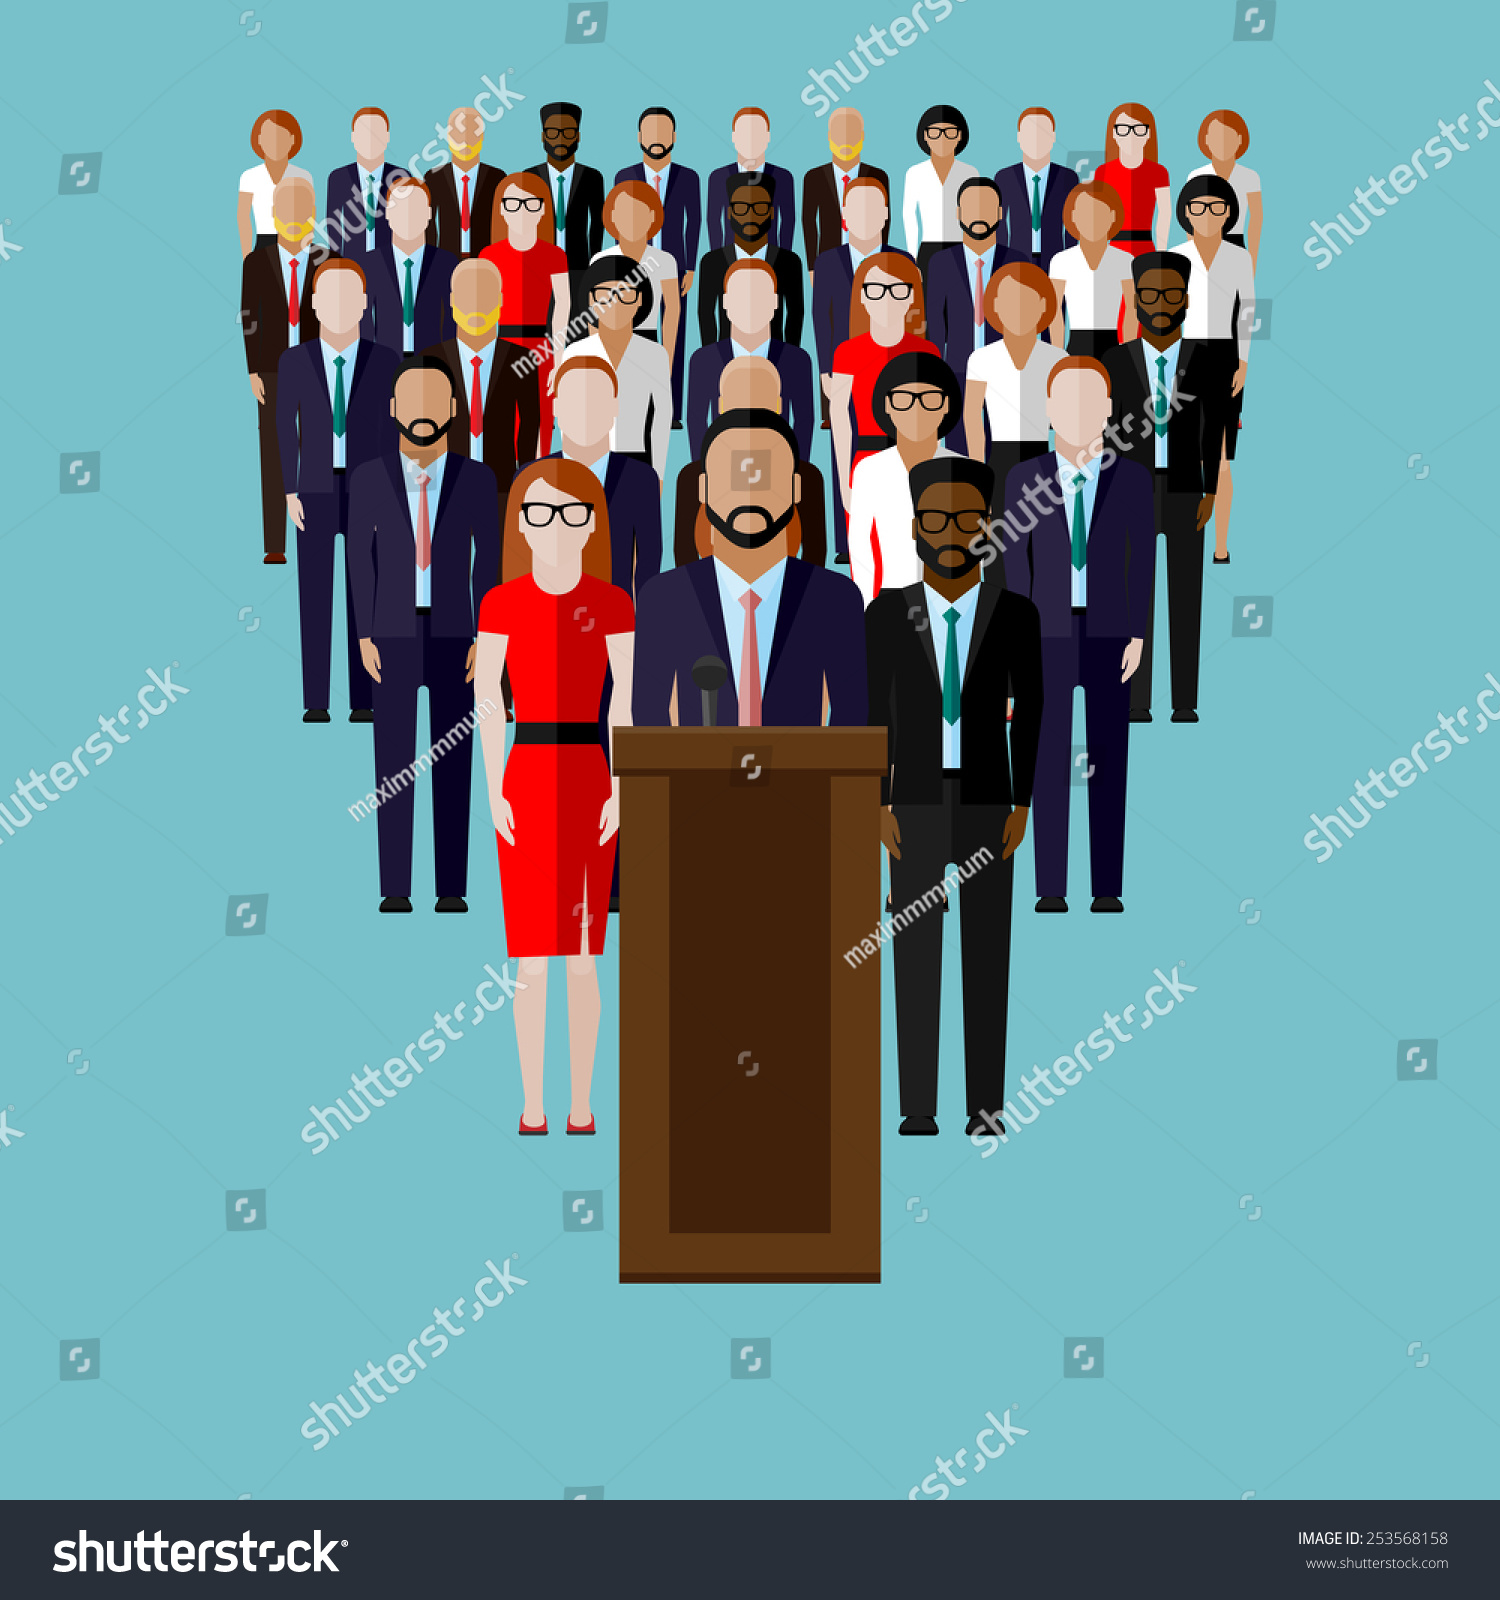 SVG of vector flat  illustration of a speaker (party candidate or leader) and team or electorate crowd. political campaign. election debates or press conference concept svg